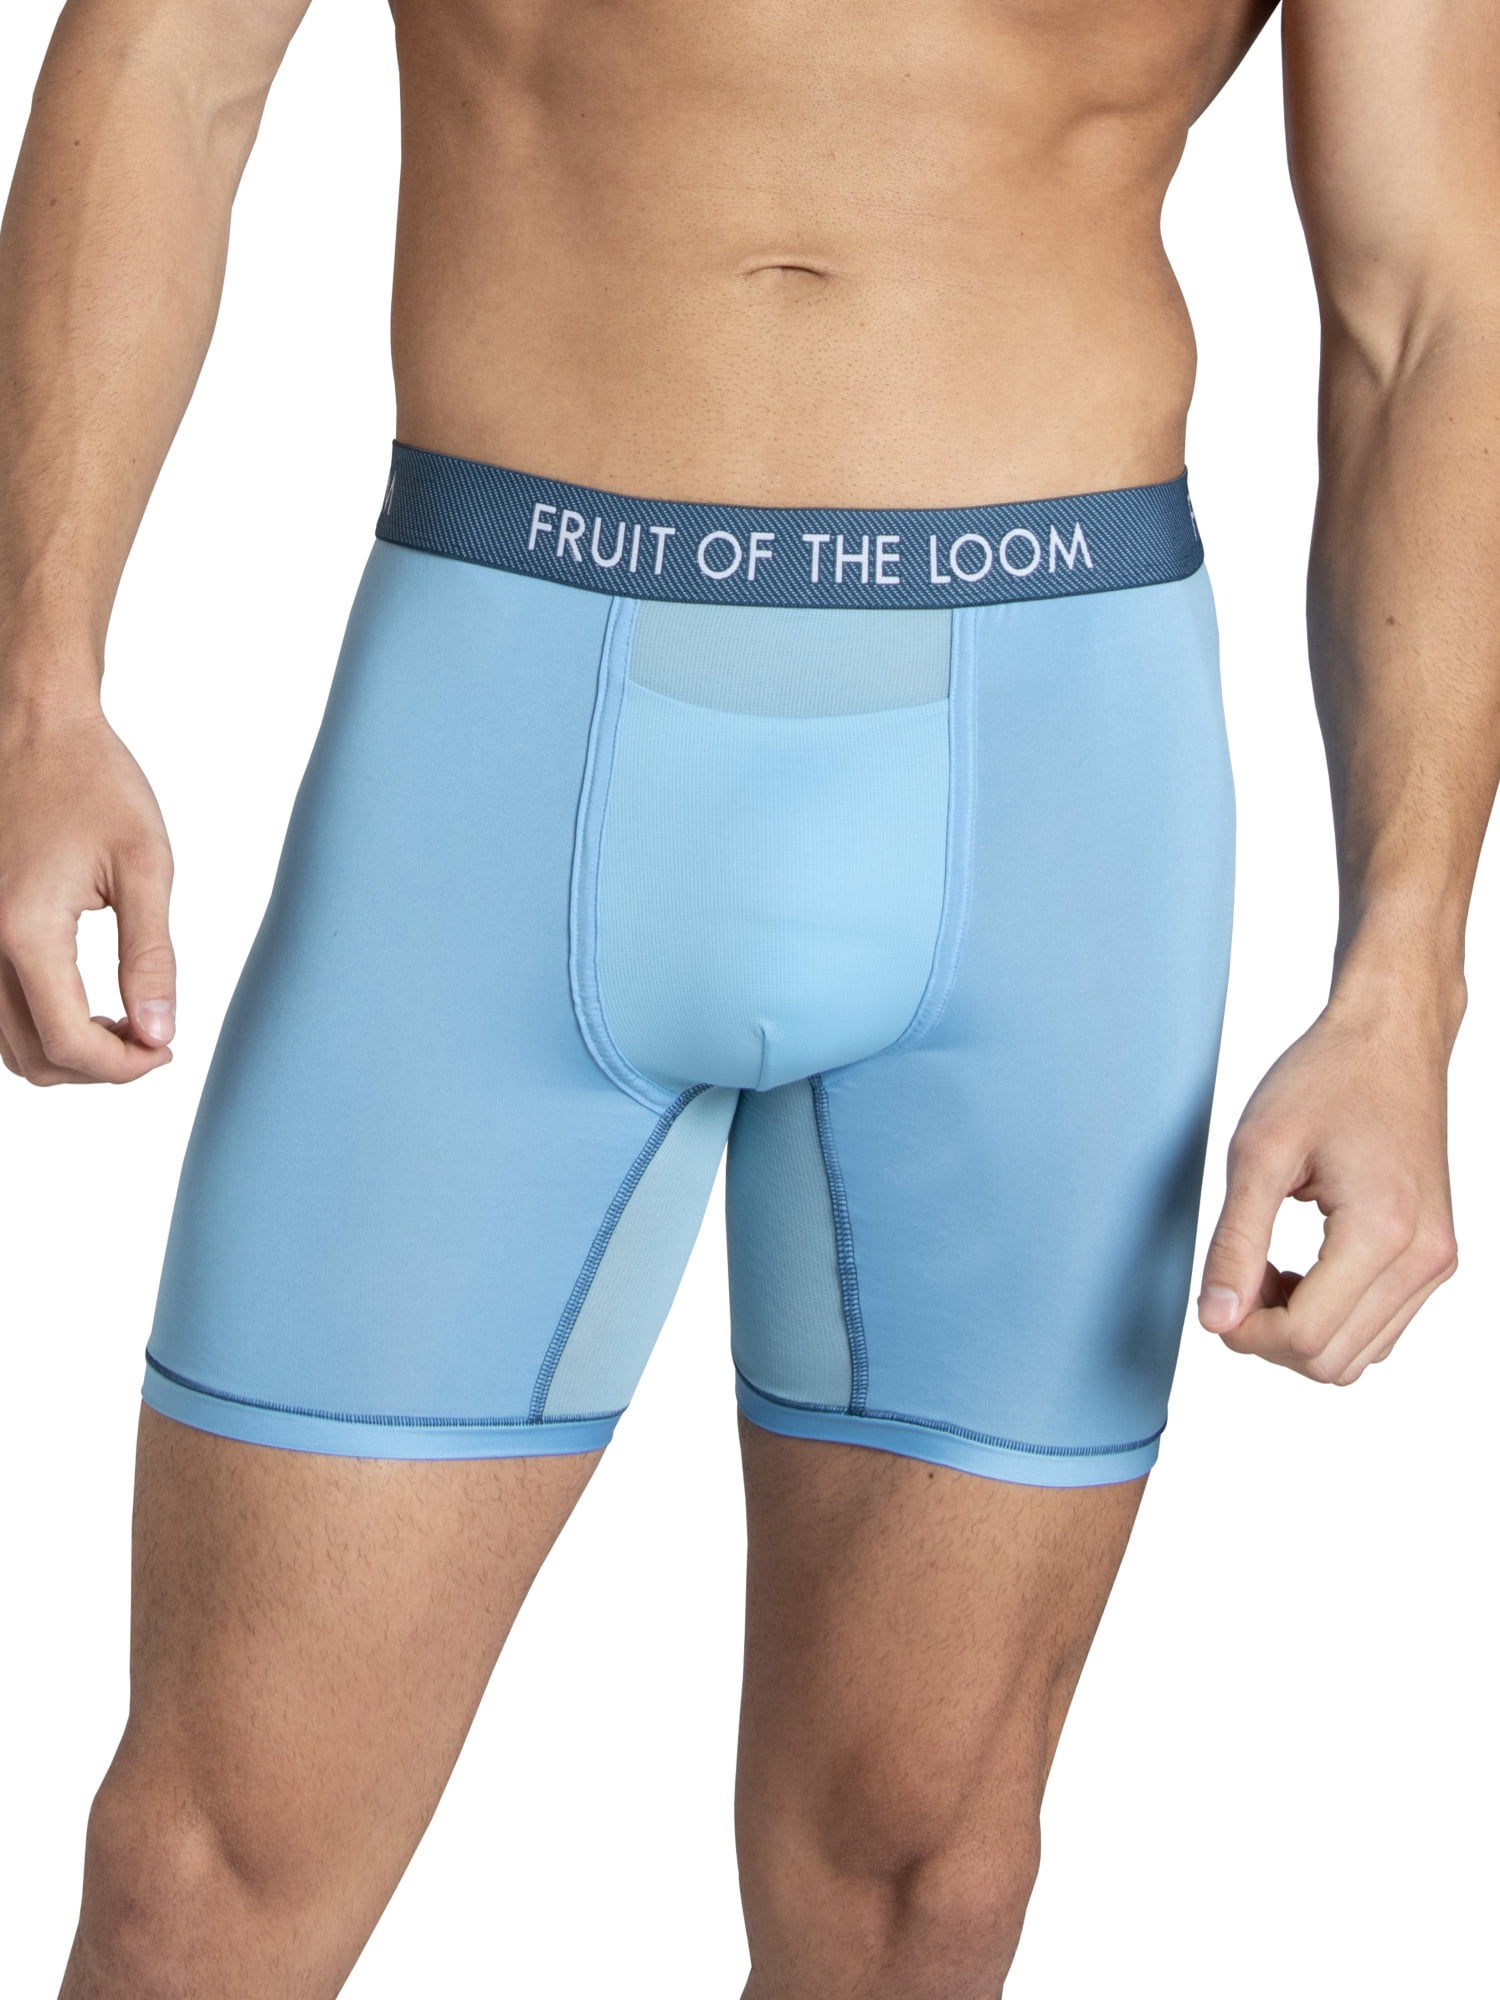 Fruit of the Loom Men's CoolZone Fly White Boxer Briefs, 5 Pack